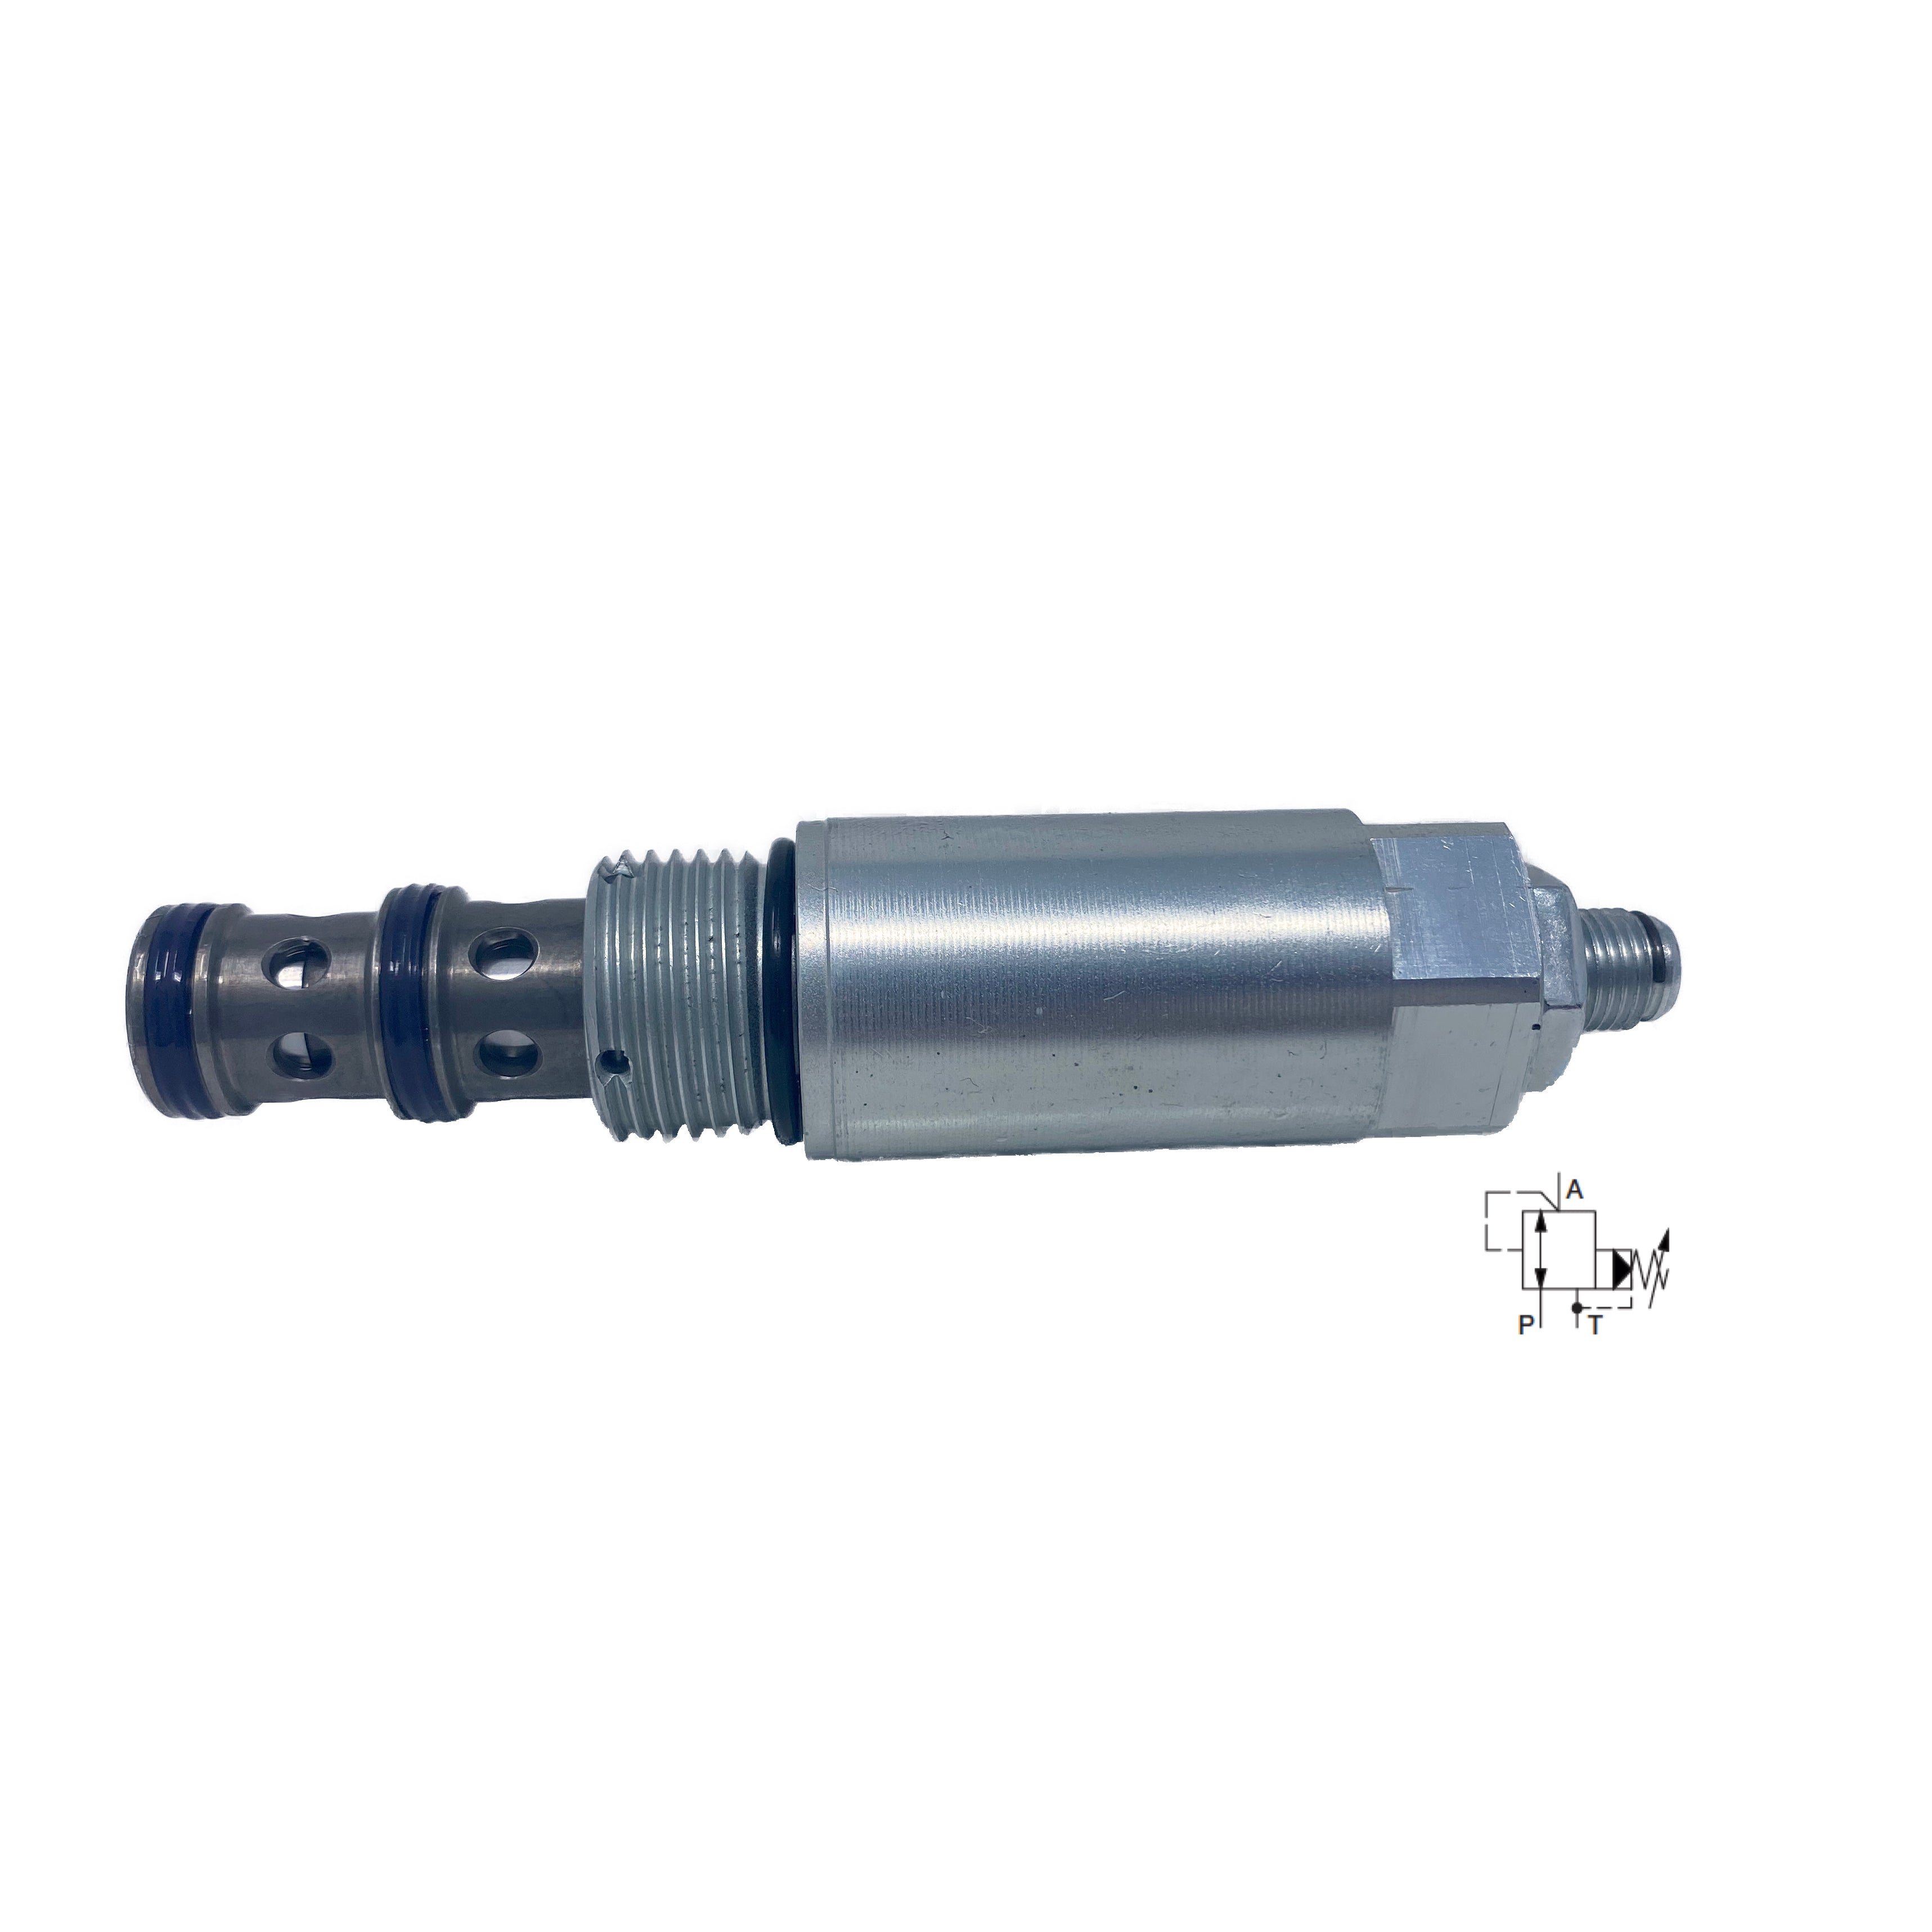 SP4A-B3/H35S-A : Argo Pressure Reducing Valve, Spool Type, Pilot Operated, Up to 5080psi, C-10-3